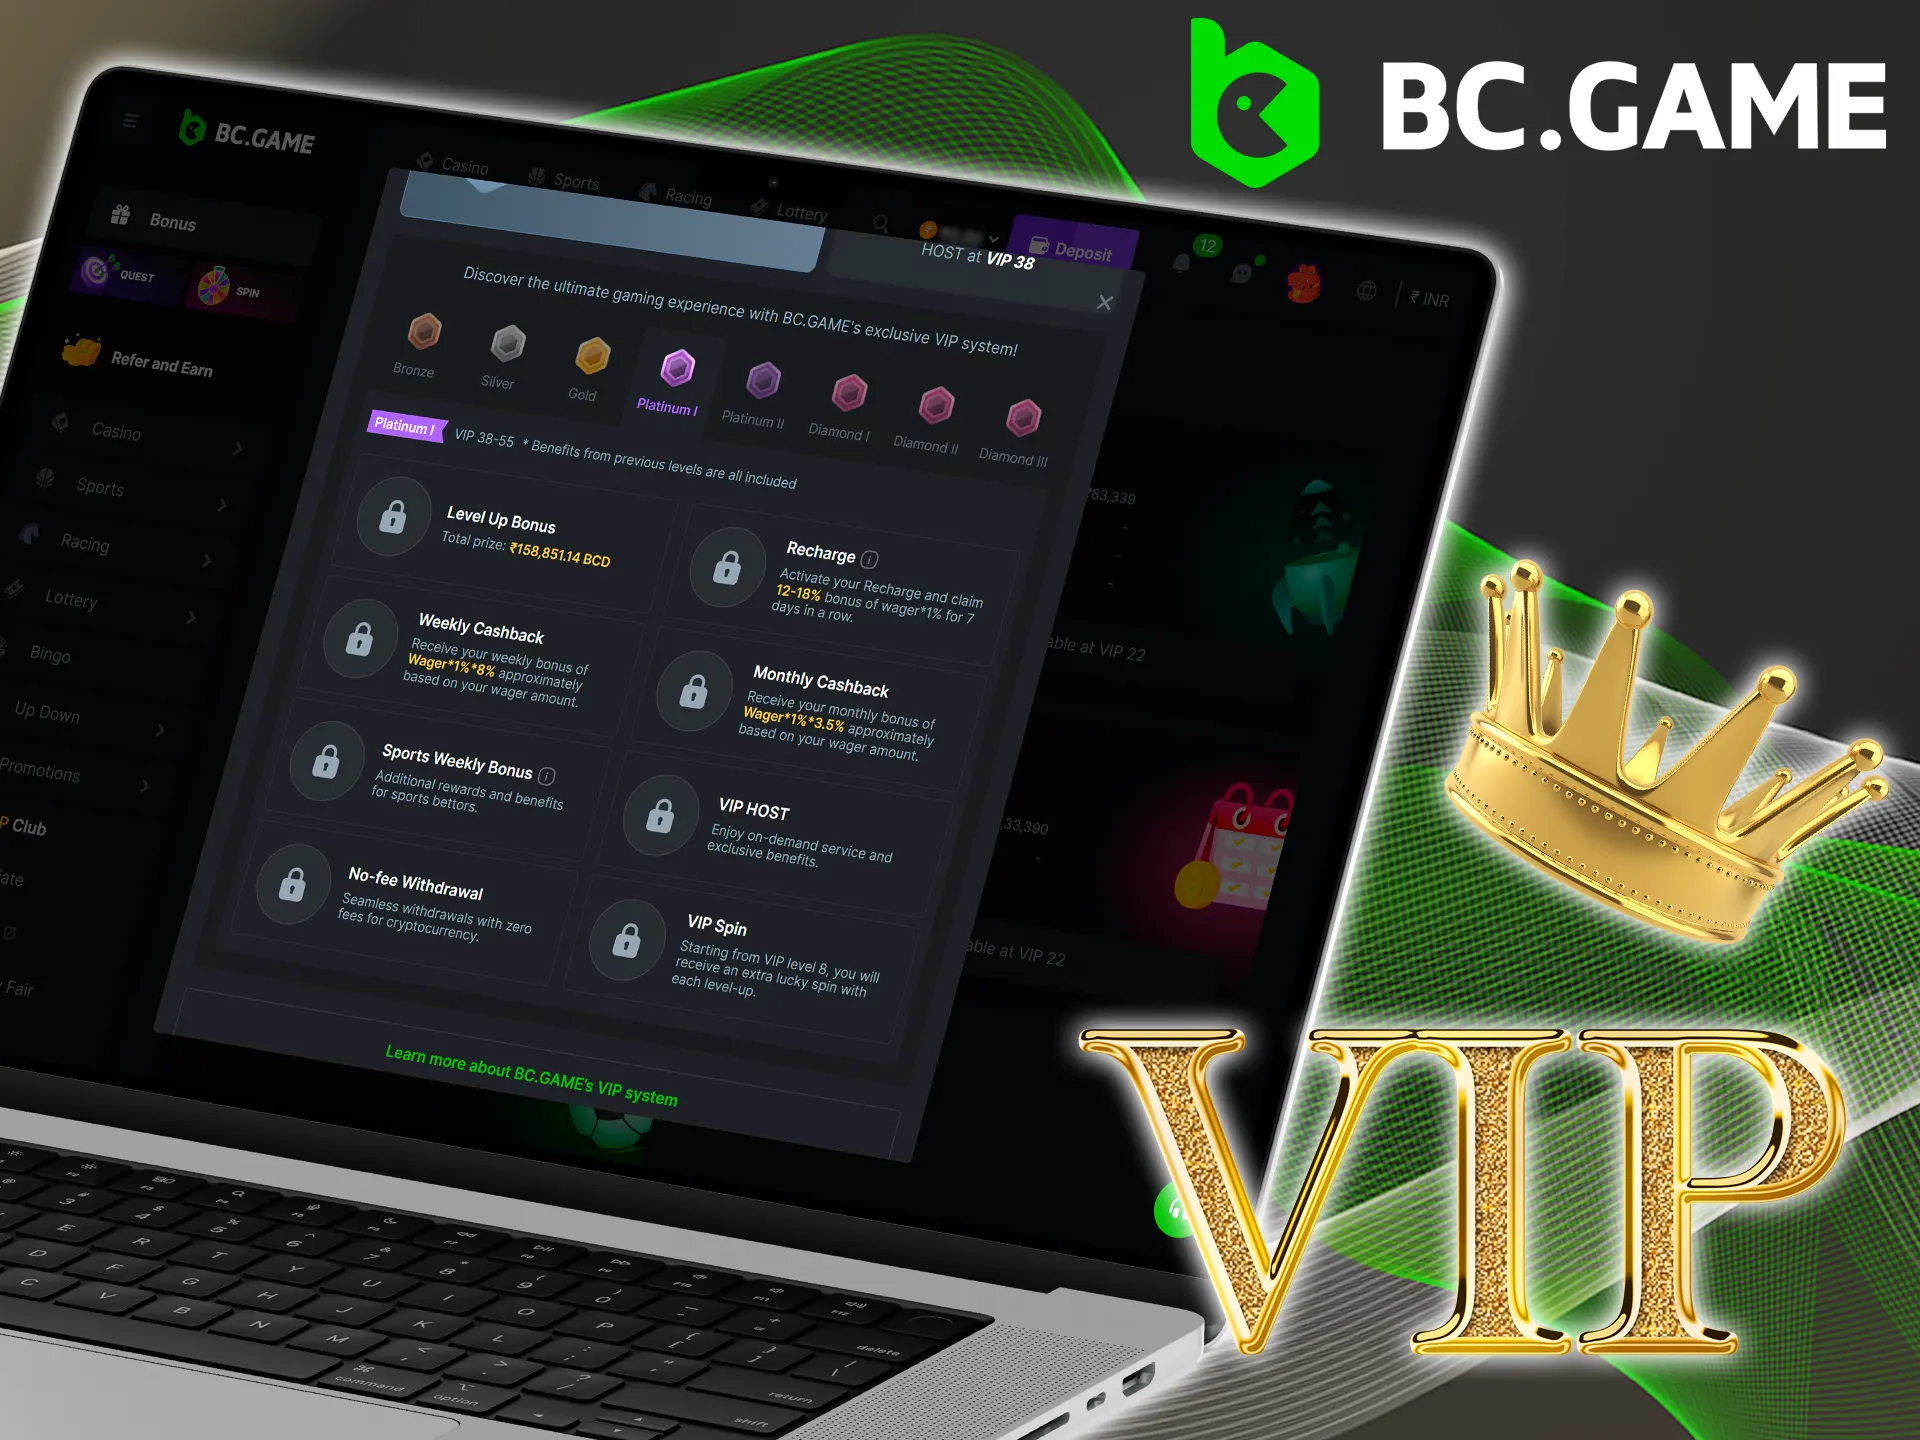 Sign up for BC Game and place your bets to become part of the VIP Club.